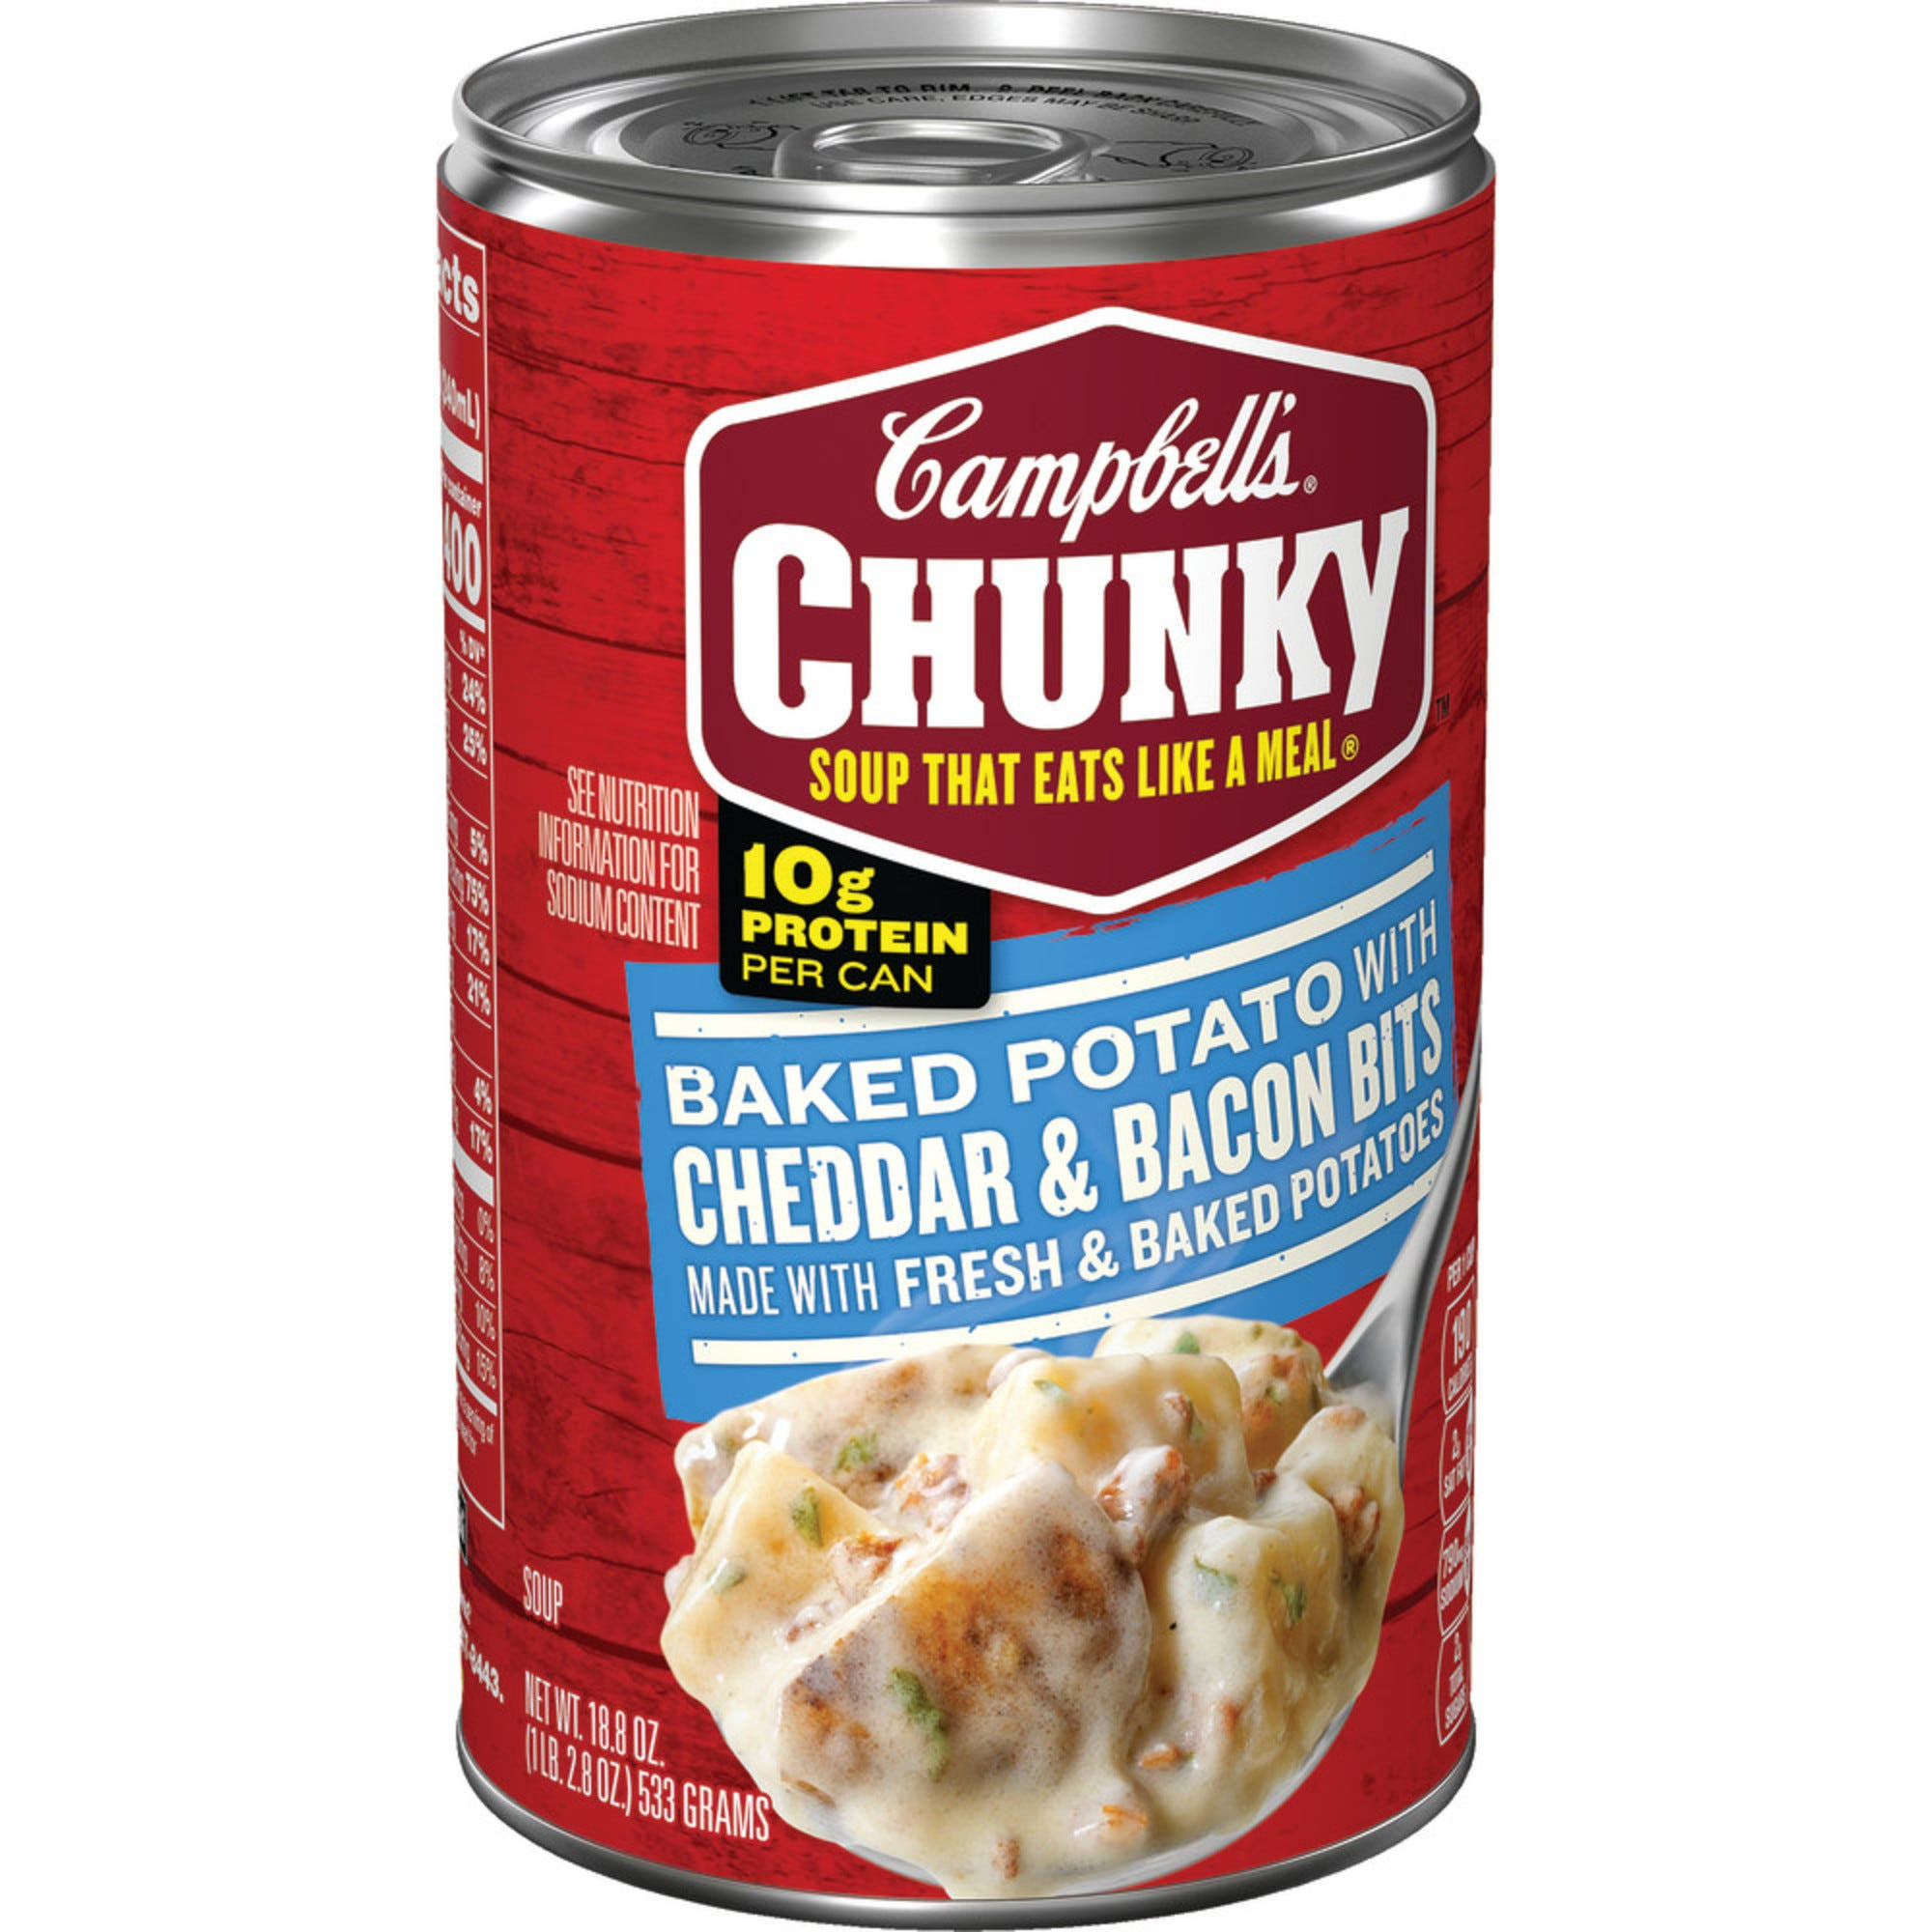 Campbell's Chunky Baked Potato with Cheddar & Bacon Bits Soup - 18.8oz